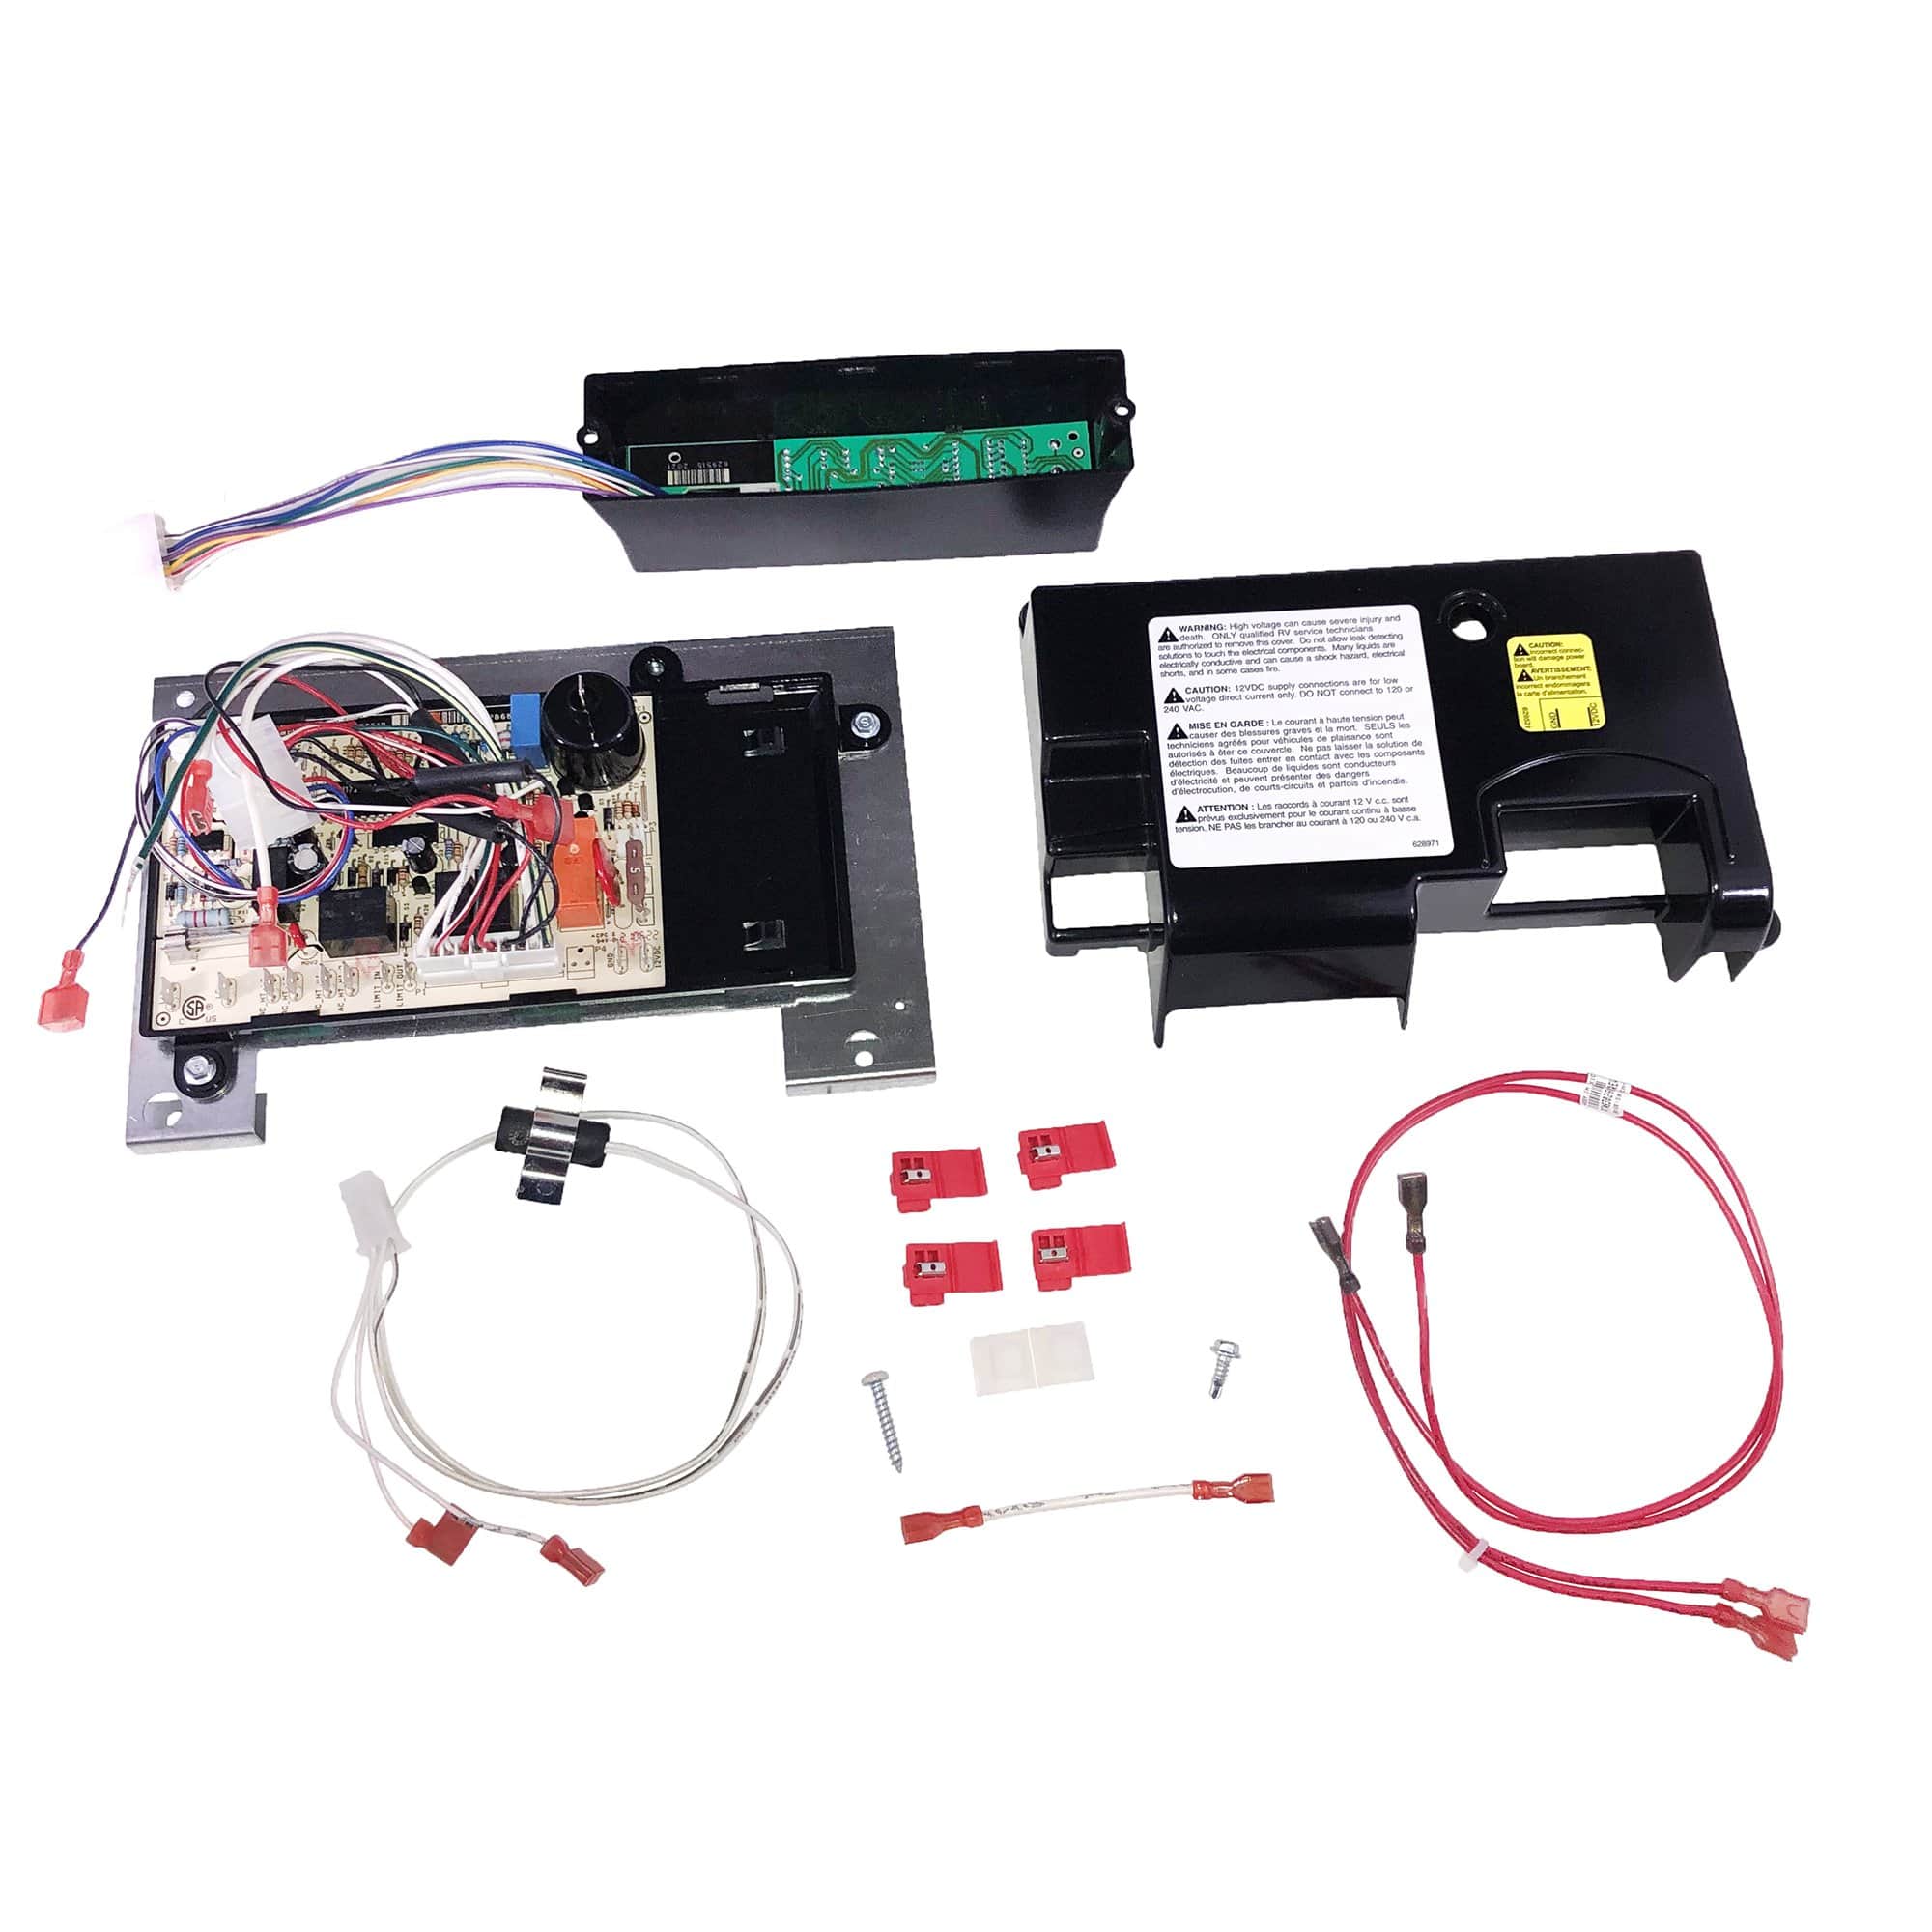 Norcold 633275 Board Kit with Control Adapter